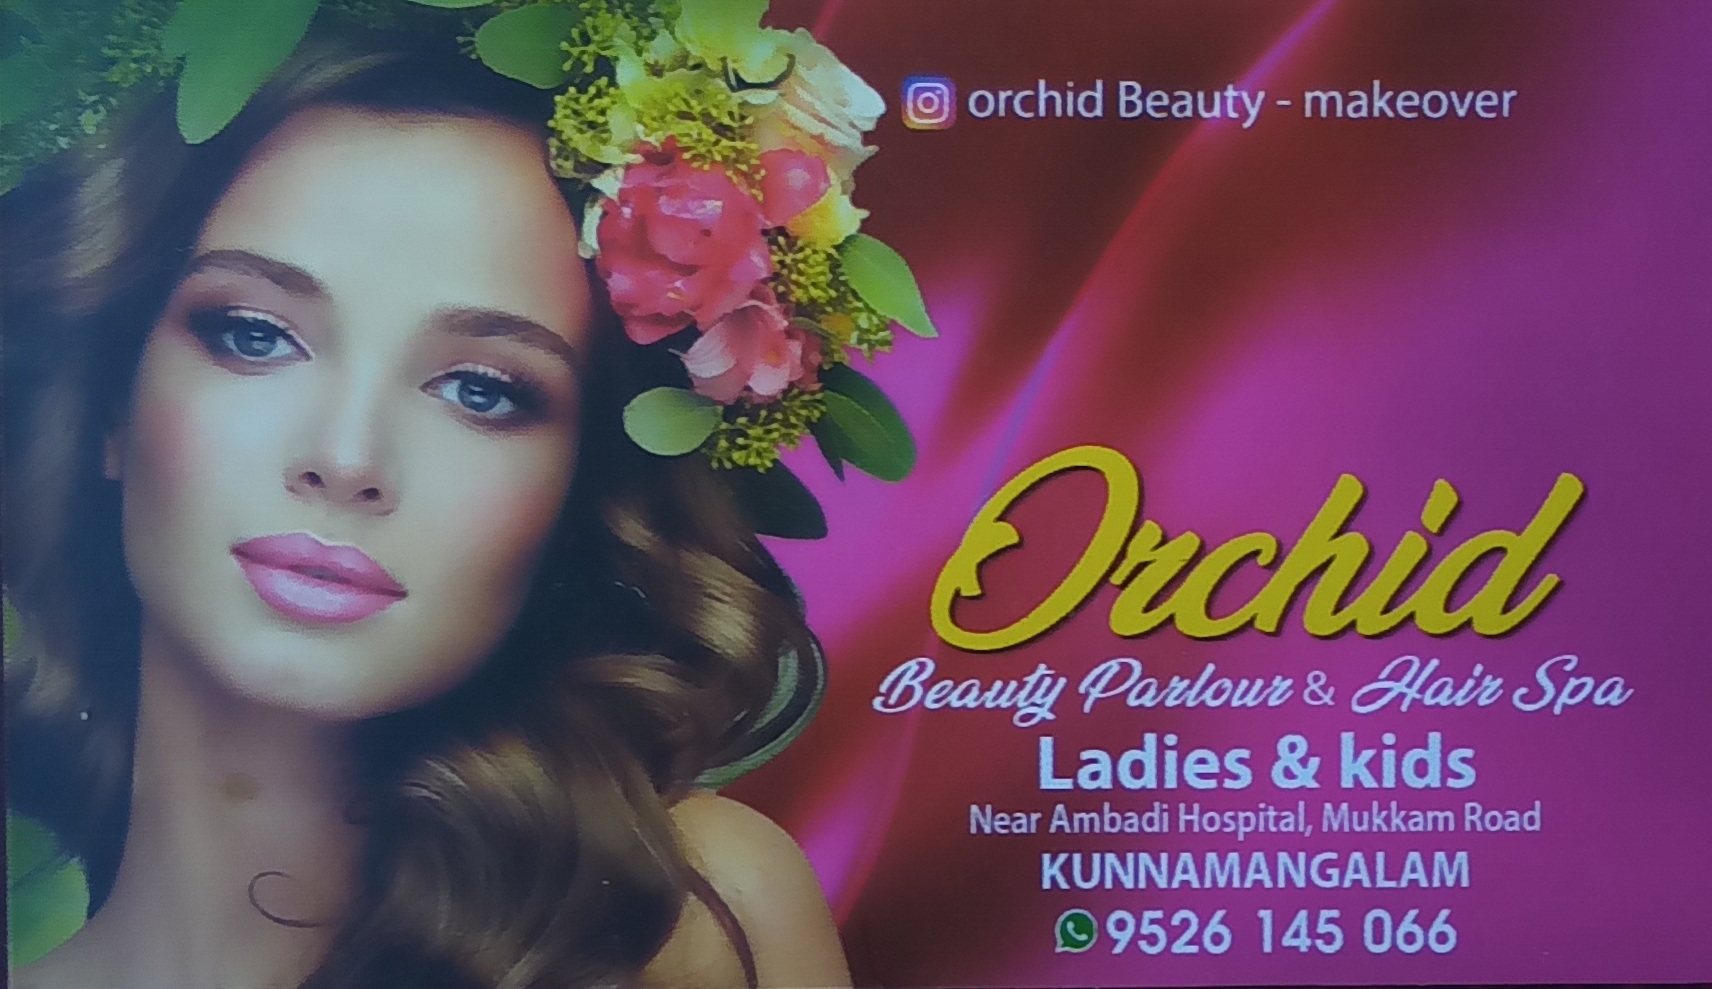 ORCHID BEAUTY PARLOUR, BEAUTY PARLOUR,  service in Kunnamangalam, Kozhikode